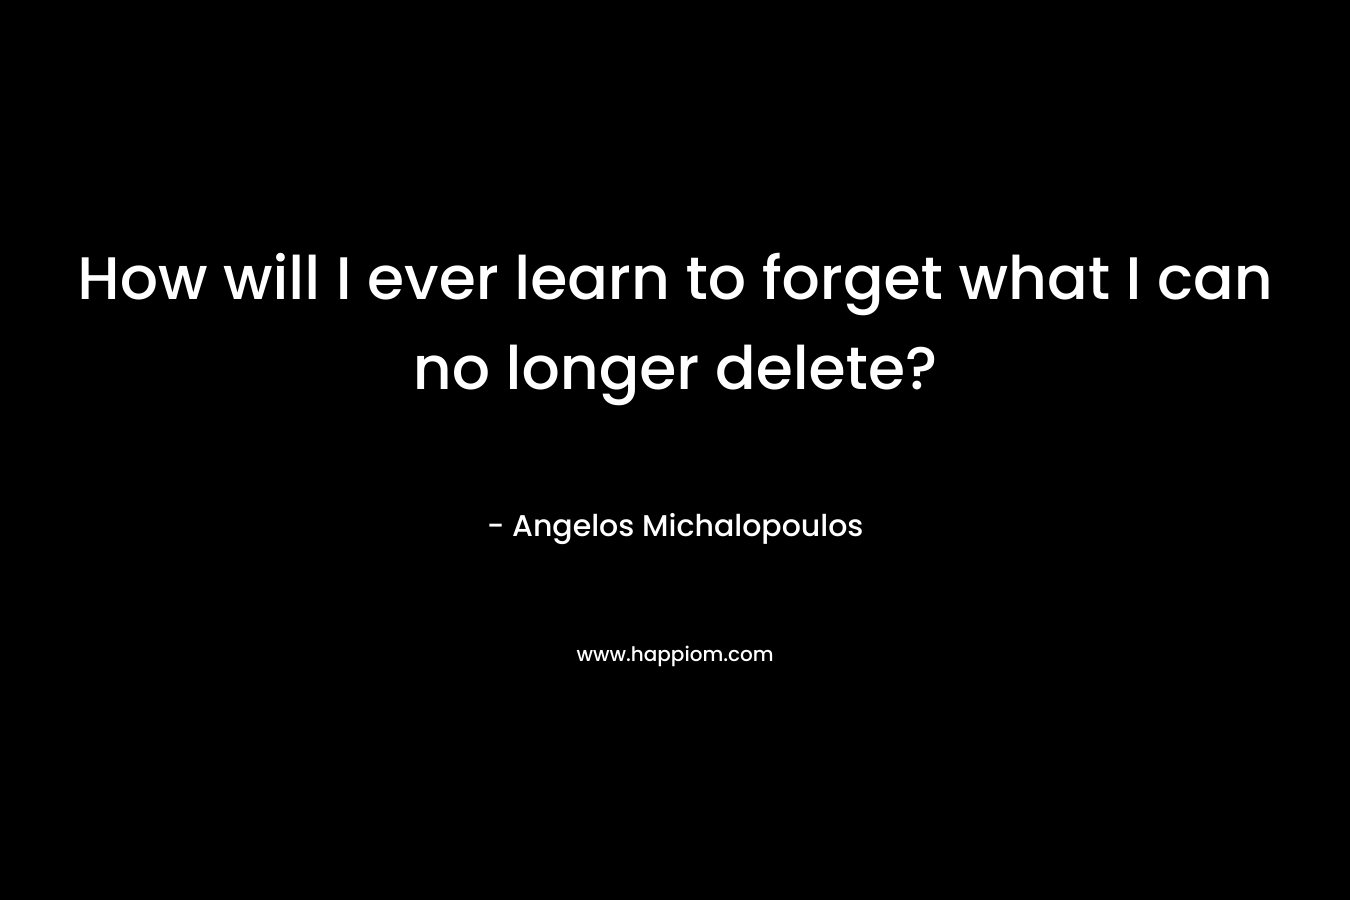 How will I ever learn to forget what I can no longer delete?